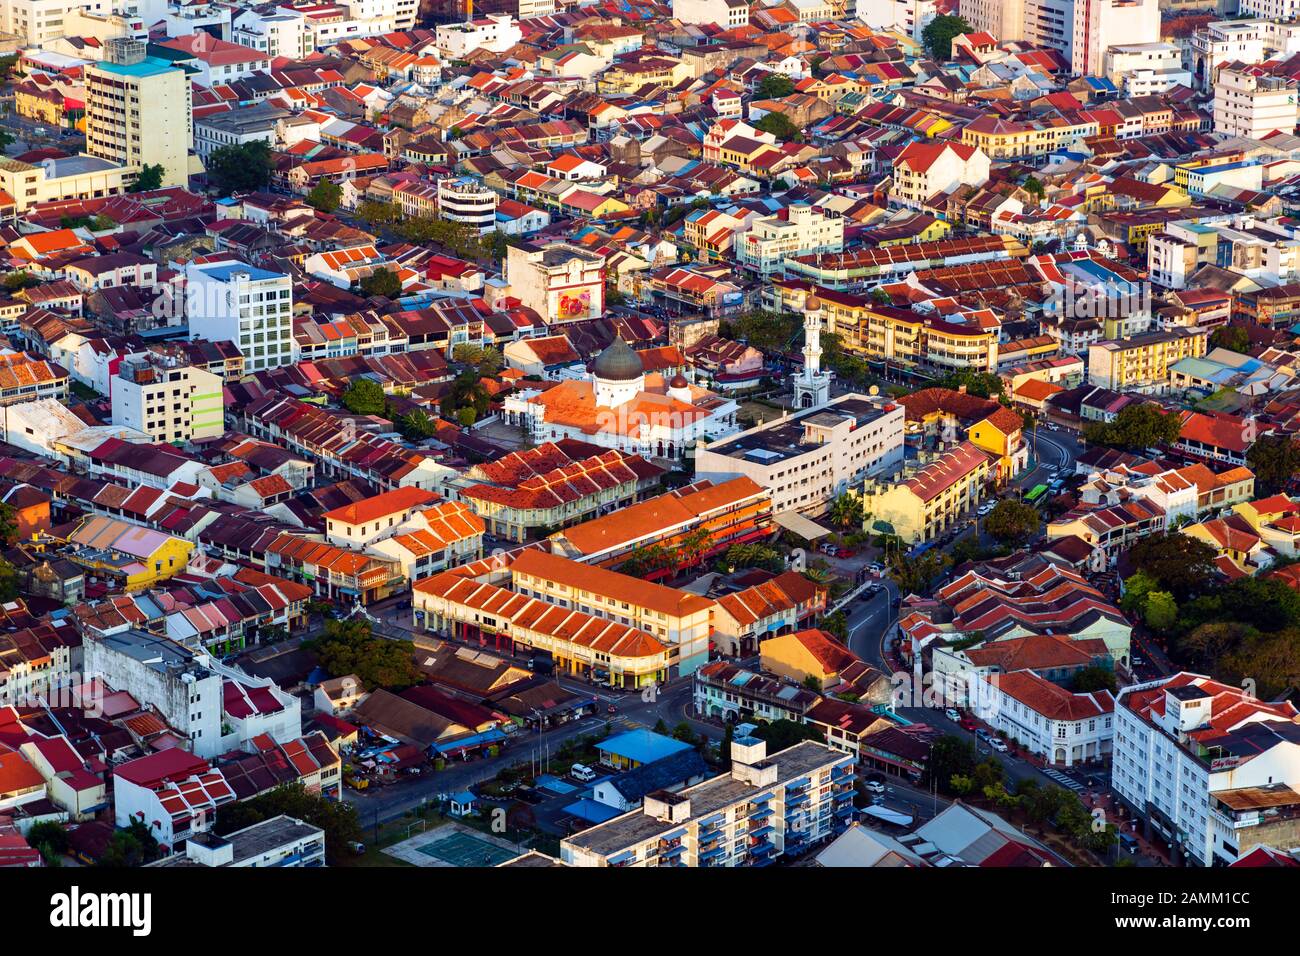 Aerial view of the city of Georgetown from the top of the Komtar Tower in Georgetown, Penang Island, Malaysia looking towards Butterworth and the Stra Stock Photo